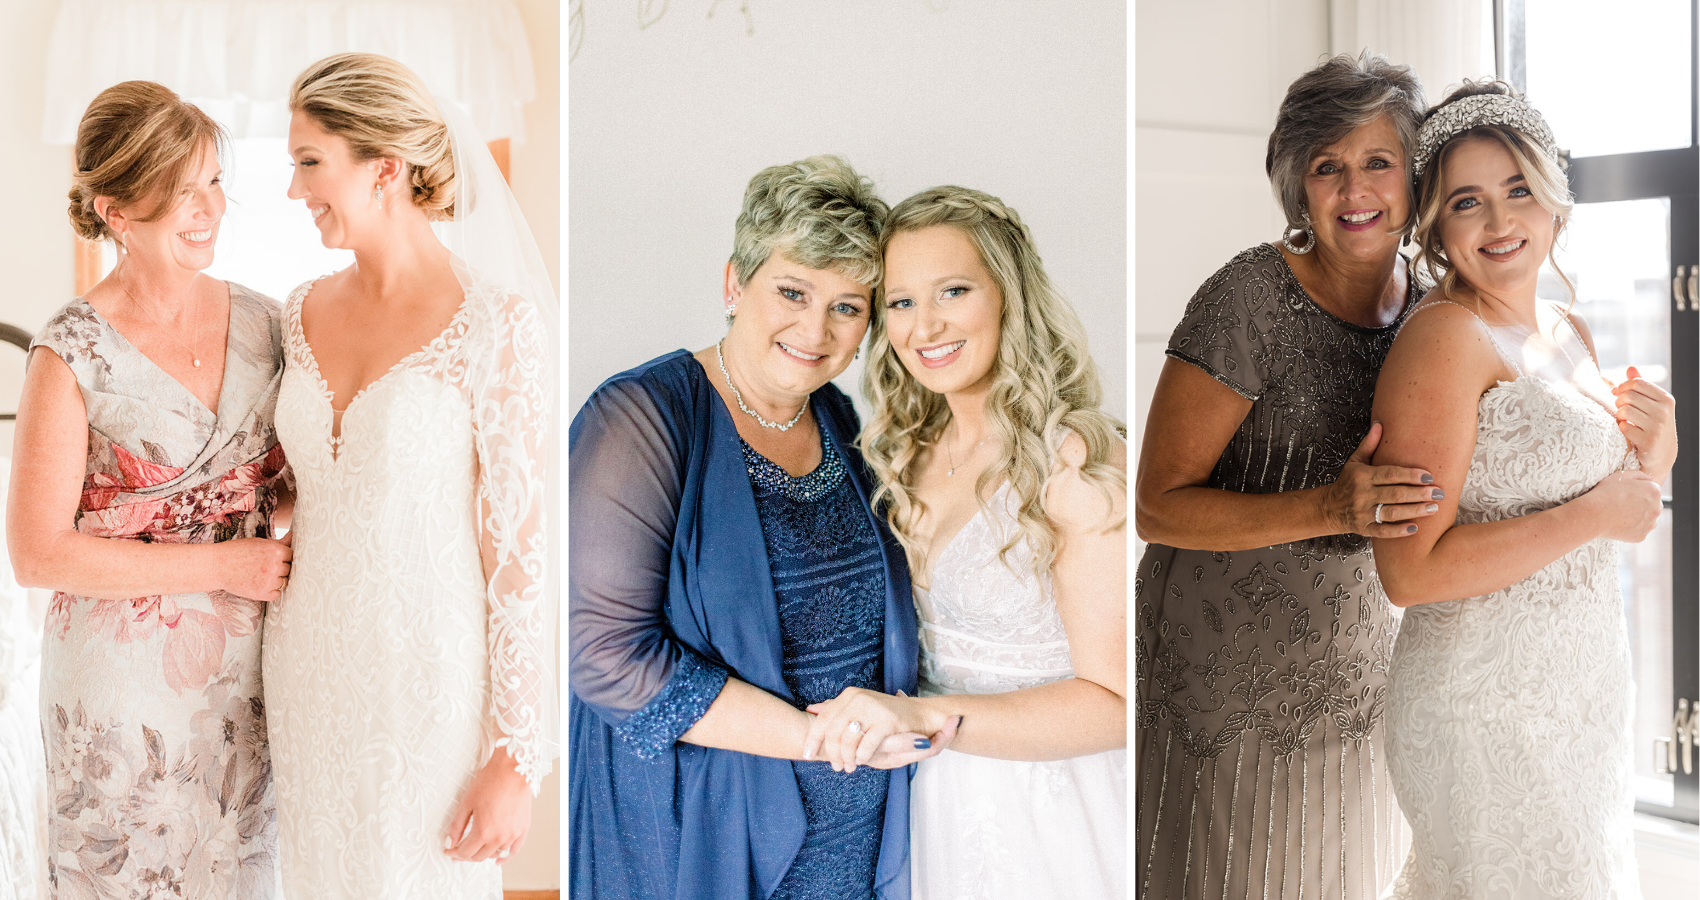 Brides With The Mother Of The Bride On Their Wedding Day With Brides Wearing Wedding Dresses Called Dakota By Sottero And Midgley, Raleynn By Rebecca Ingram, And Alistaire Lynette By Maggie Sottero